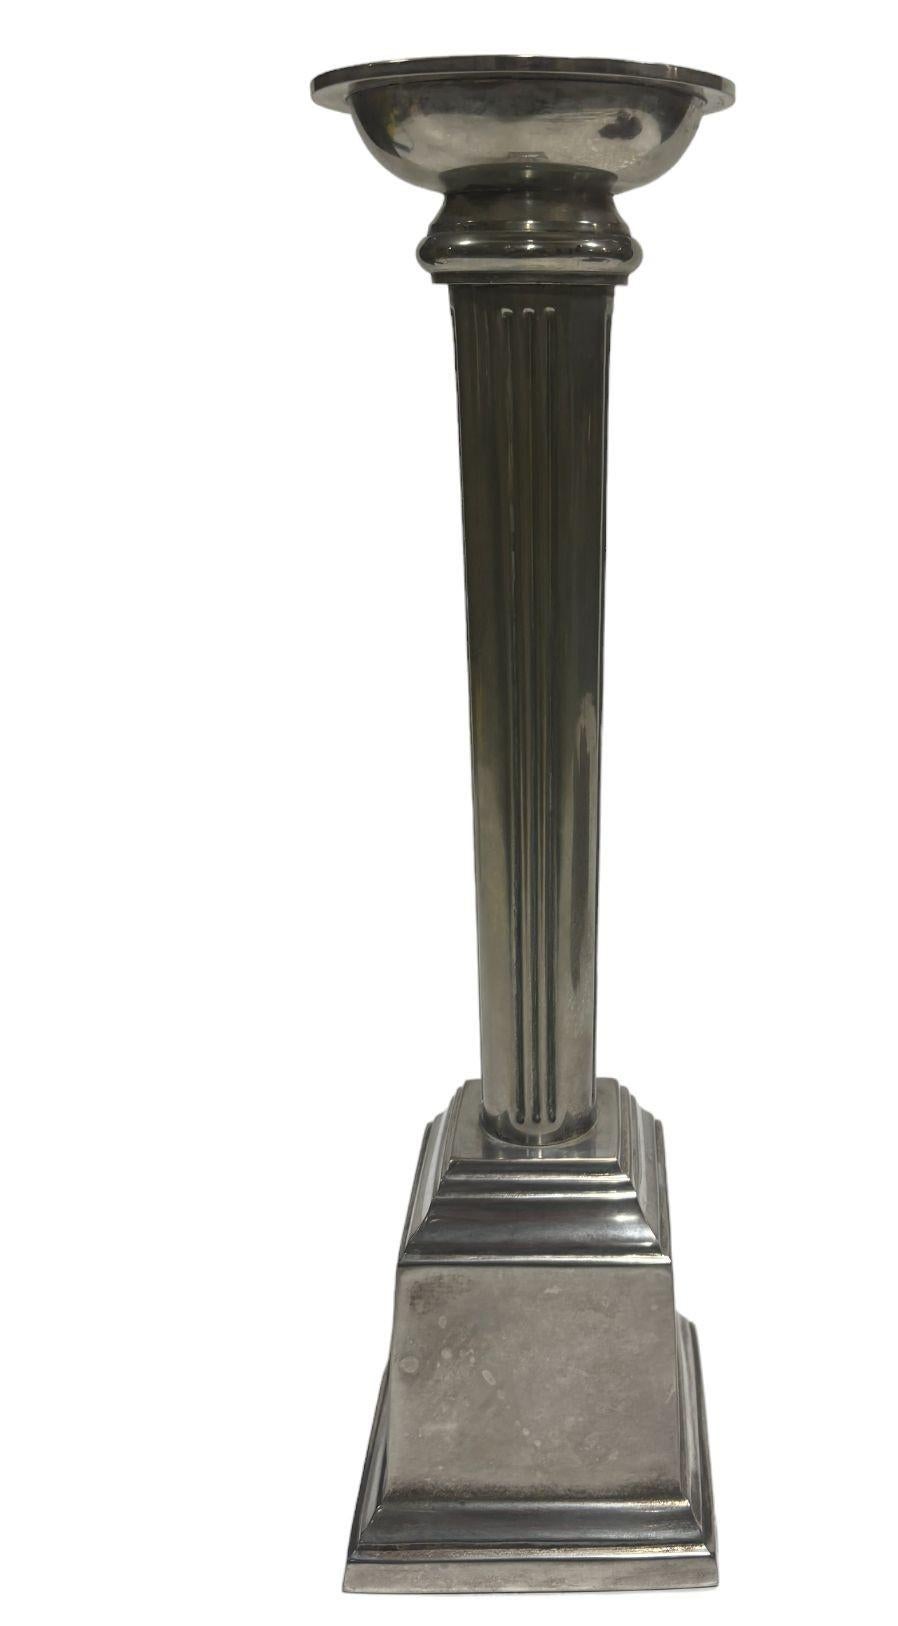 Embrace the timeless allure of the Vintage Roman Column Candlestick Holder, a stunning piece that exudes classical elegance and refined craftsmanship. Crafted with meticulous attention to detail, this candlestick holder features the iconic Roman